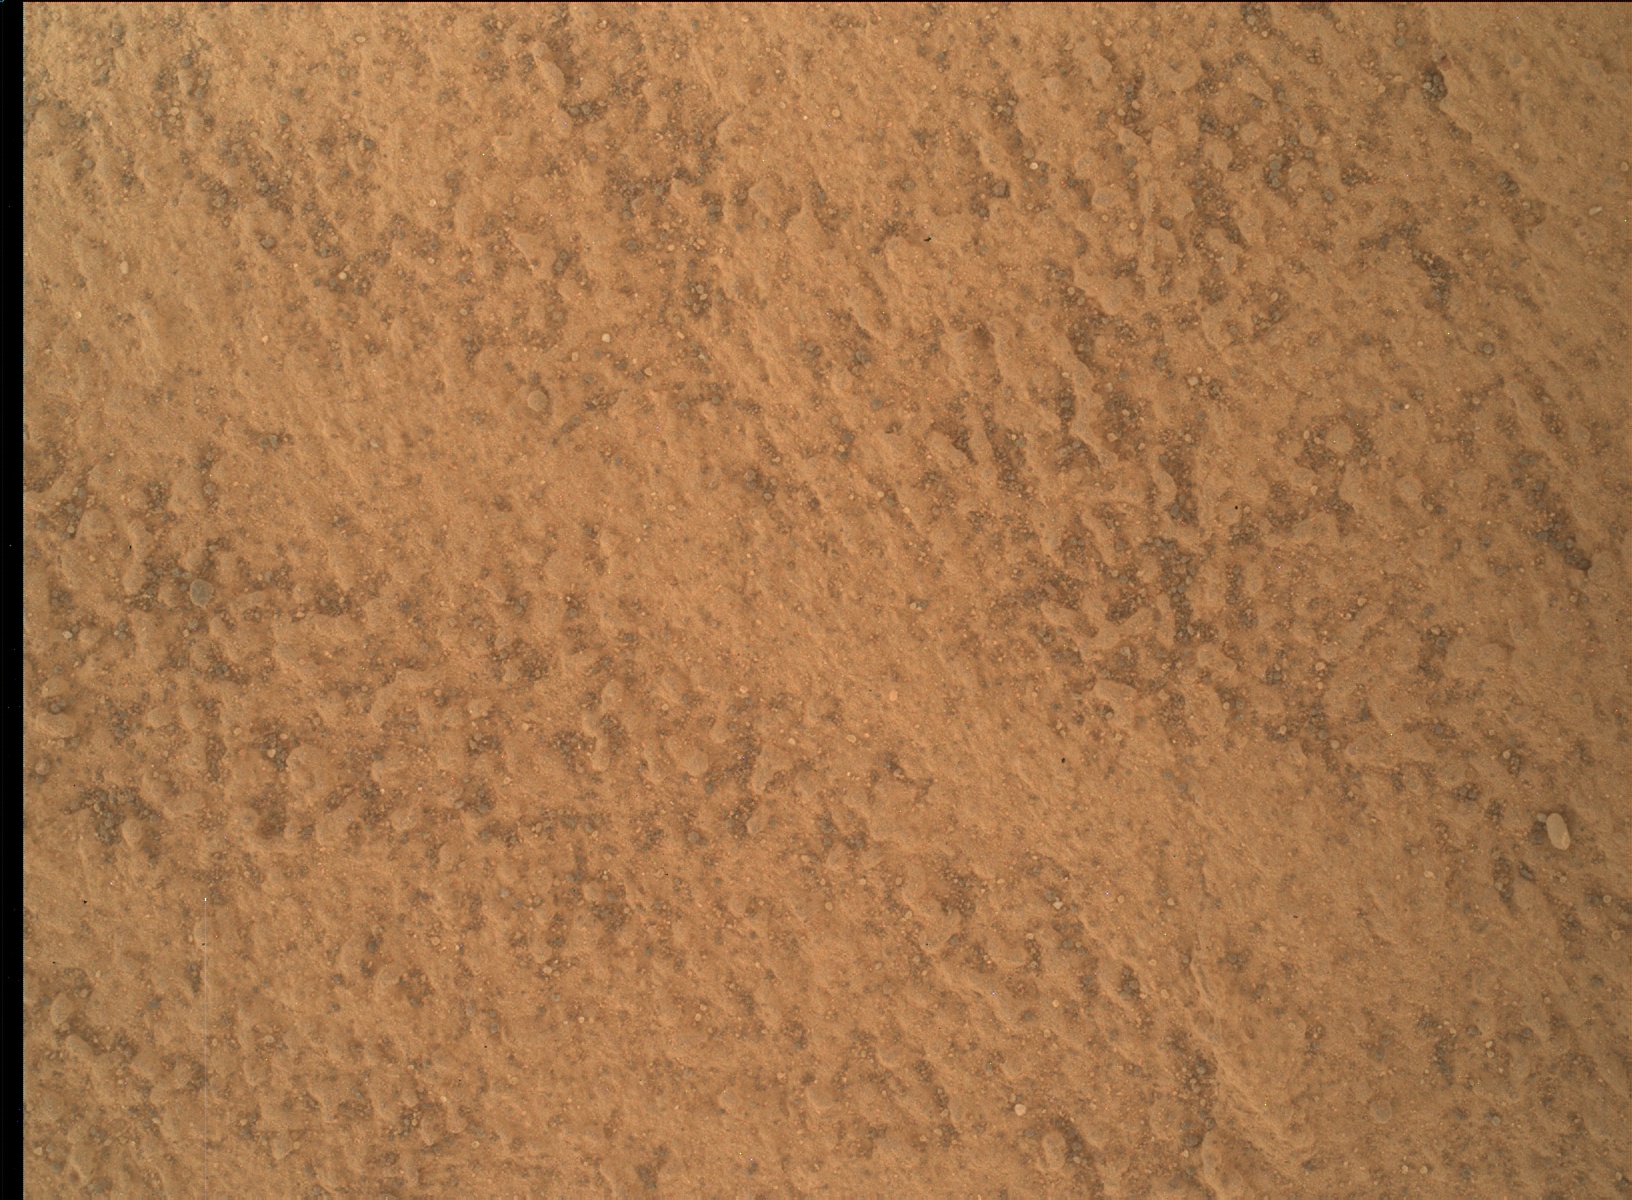 Nasa's Mars rover Curiosity acquired this image using its Mars Hand Lens Imager (MAHLI) on Sol 3211